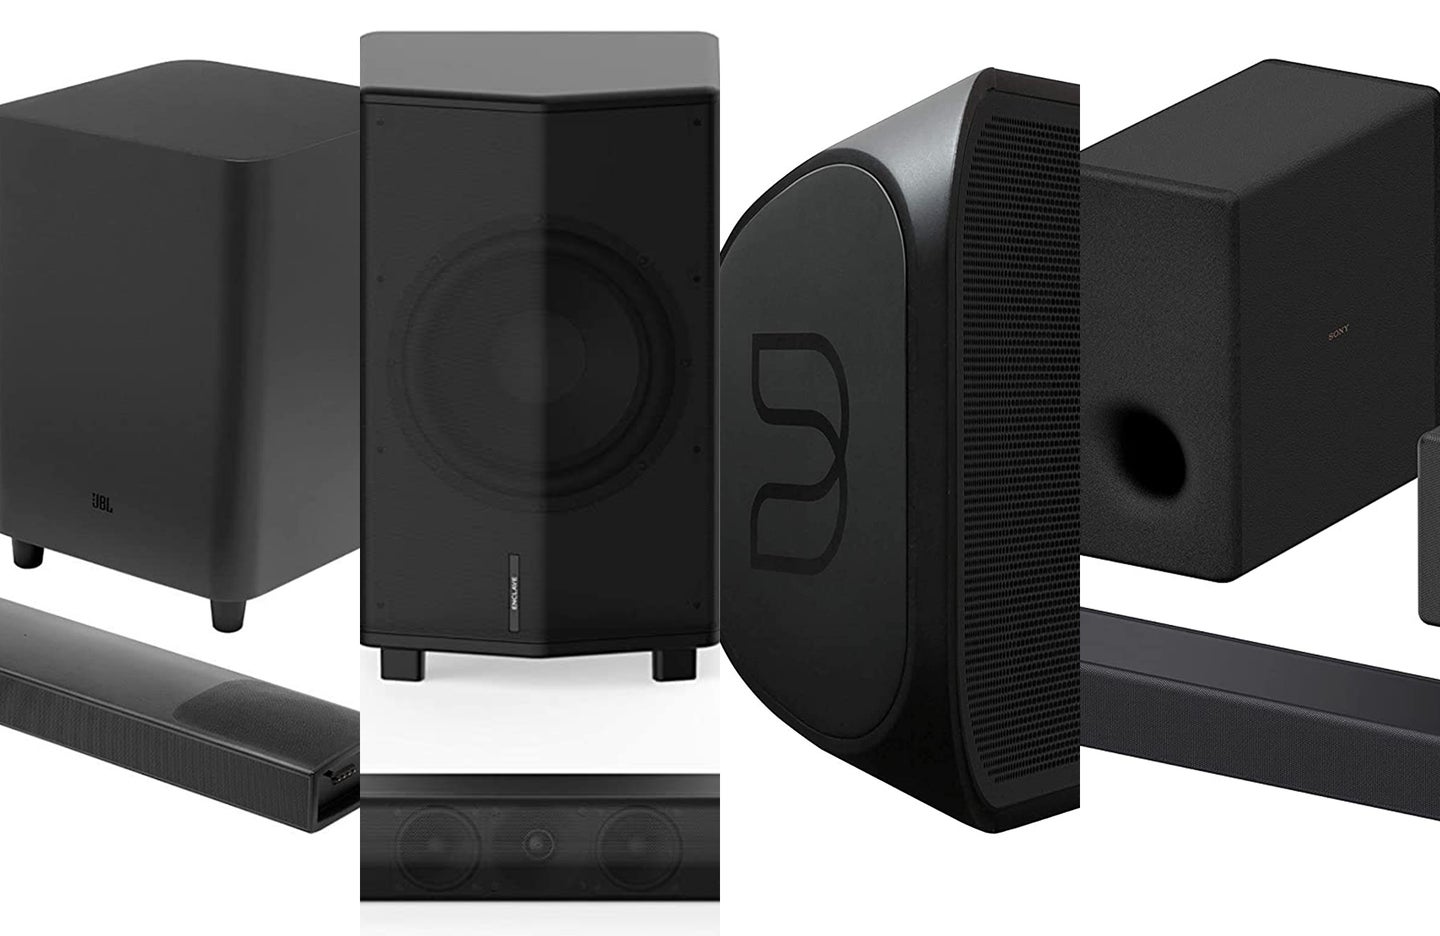 Affordable alternative to a full home theater system